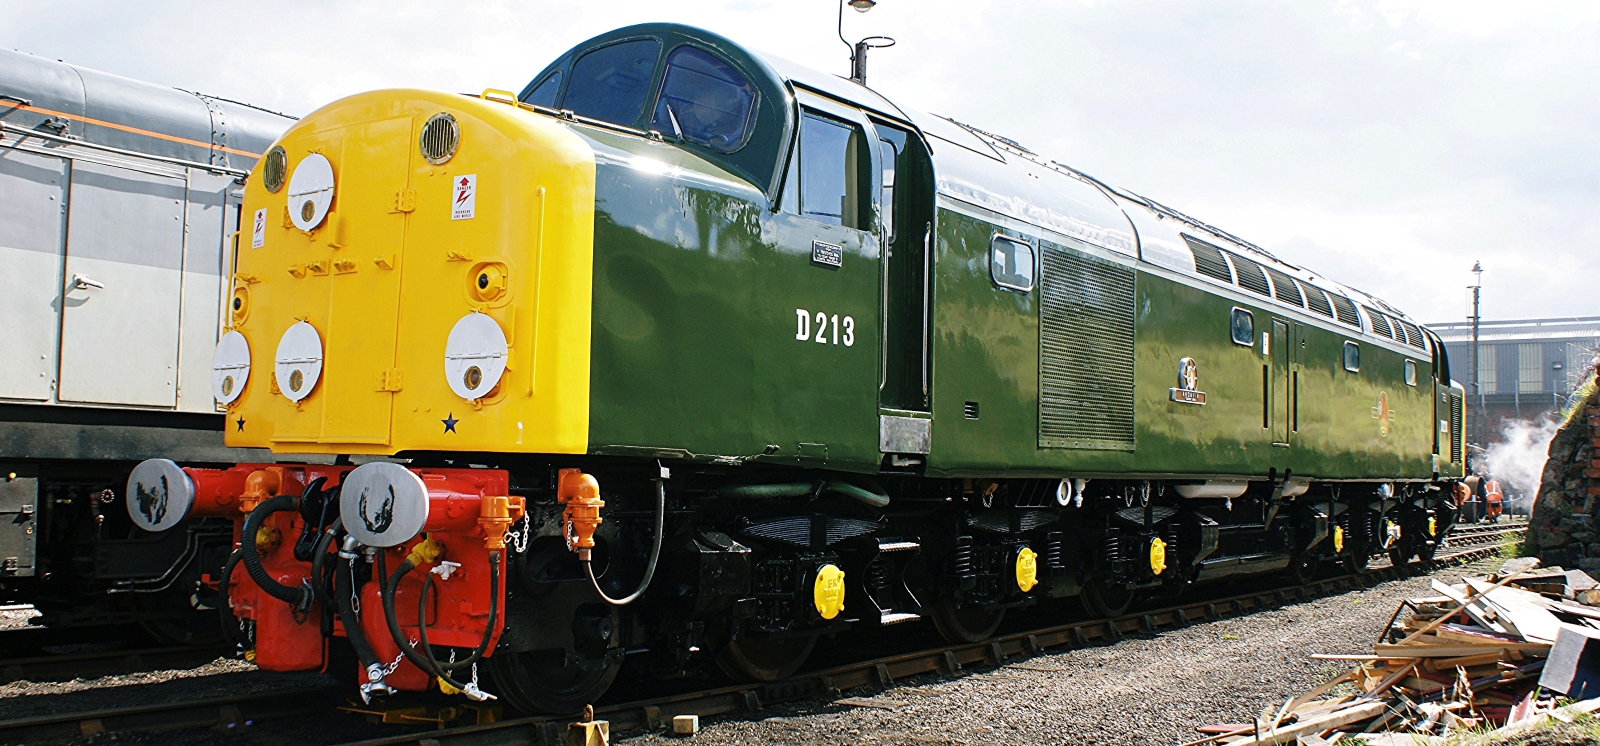 40 013 (ex D213) was preserved in the original green livery, seen here at Barrow Hill in August 2008